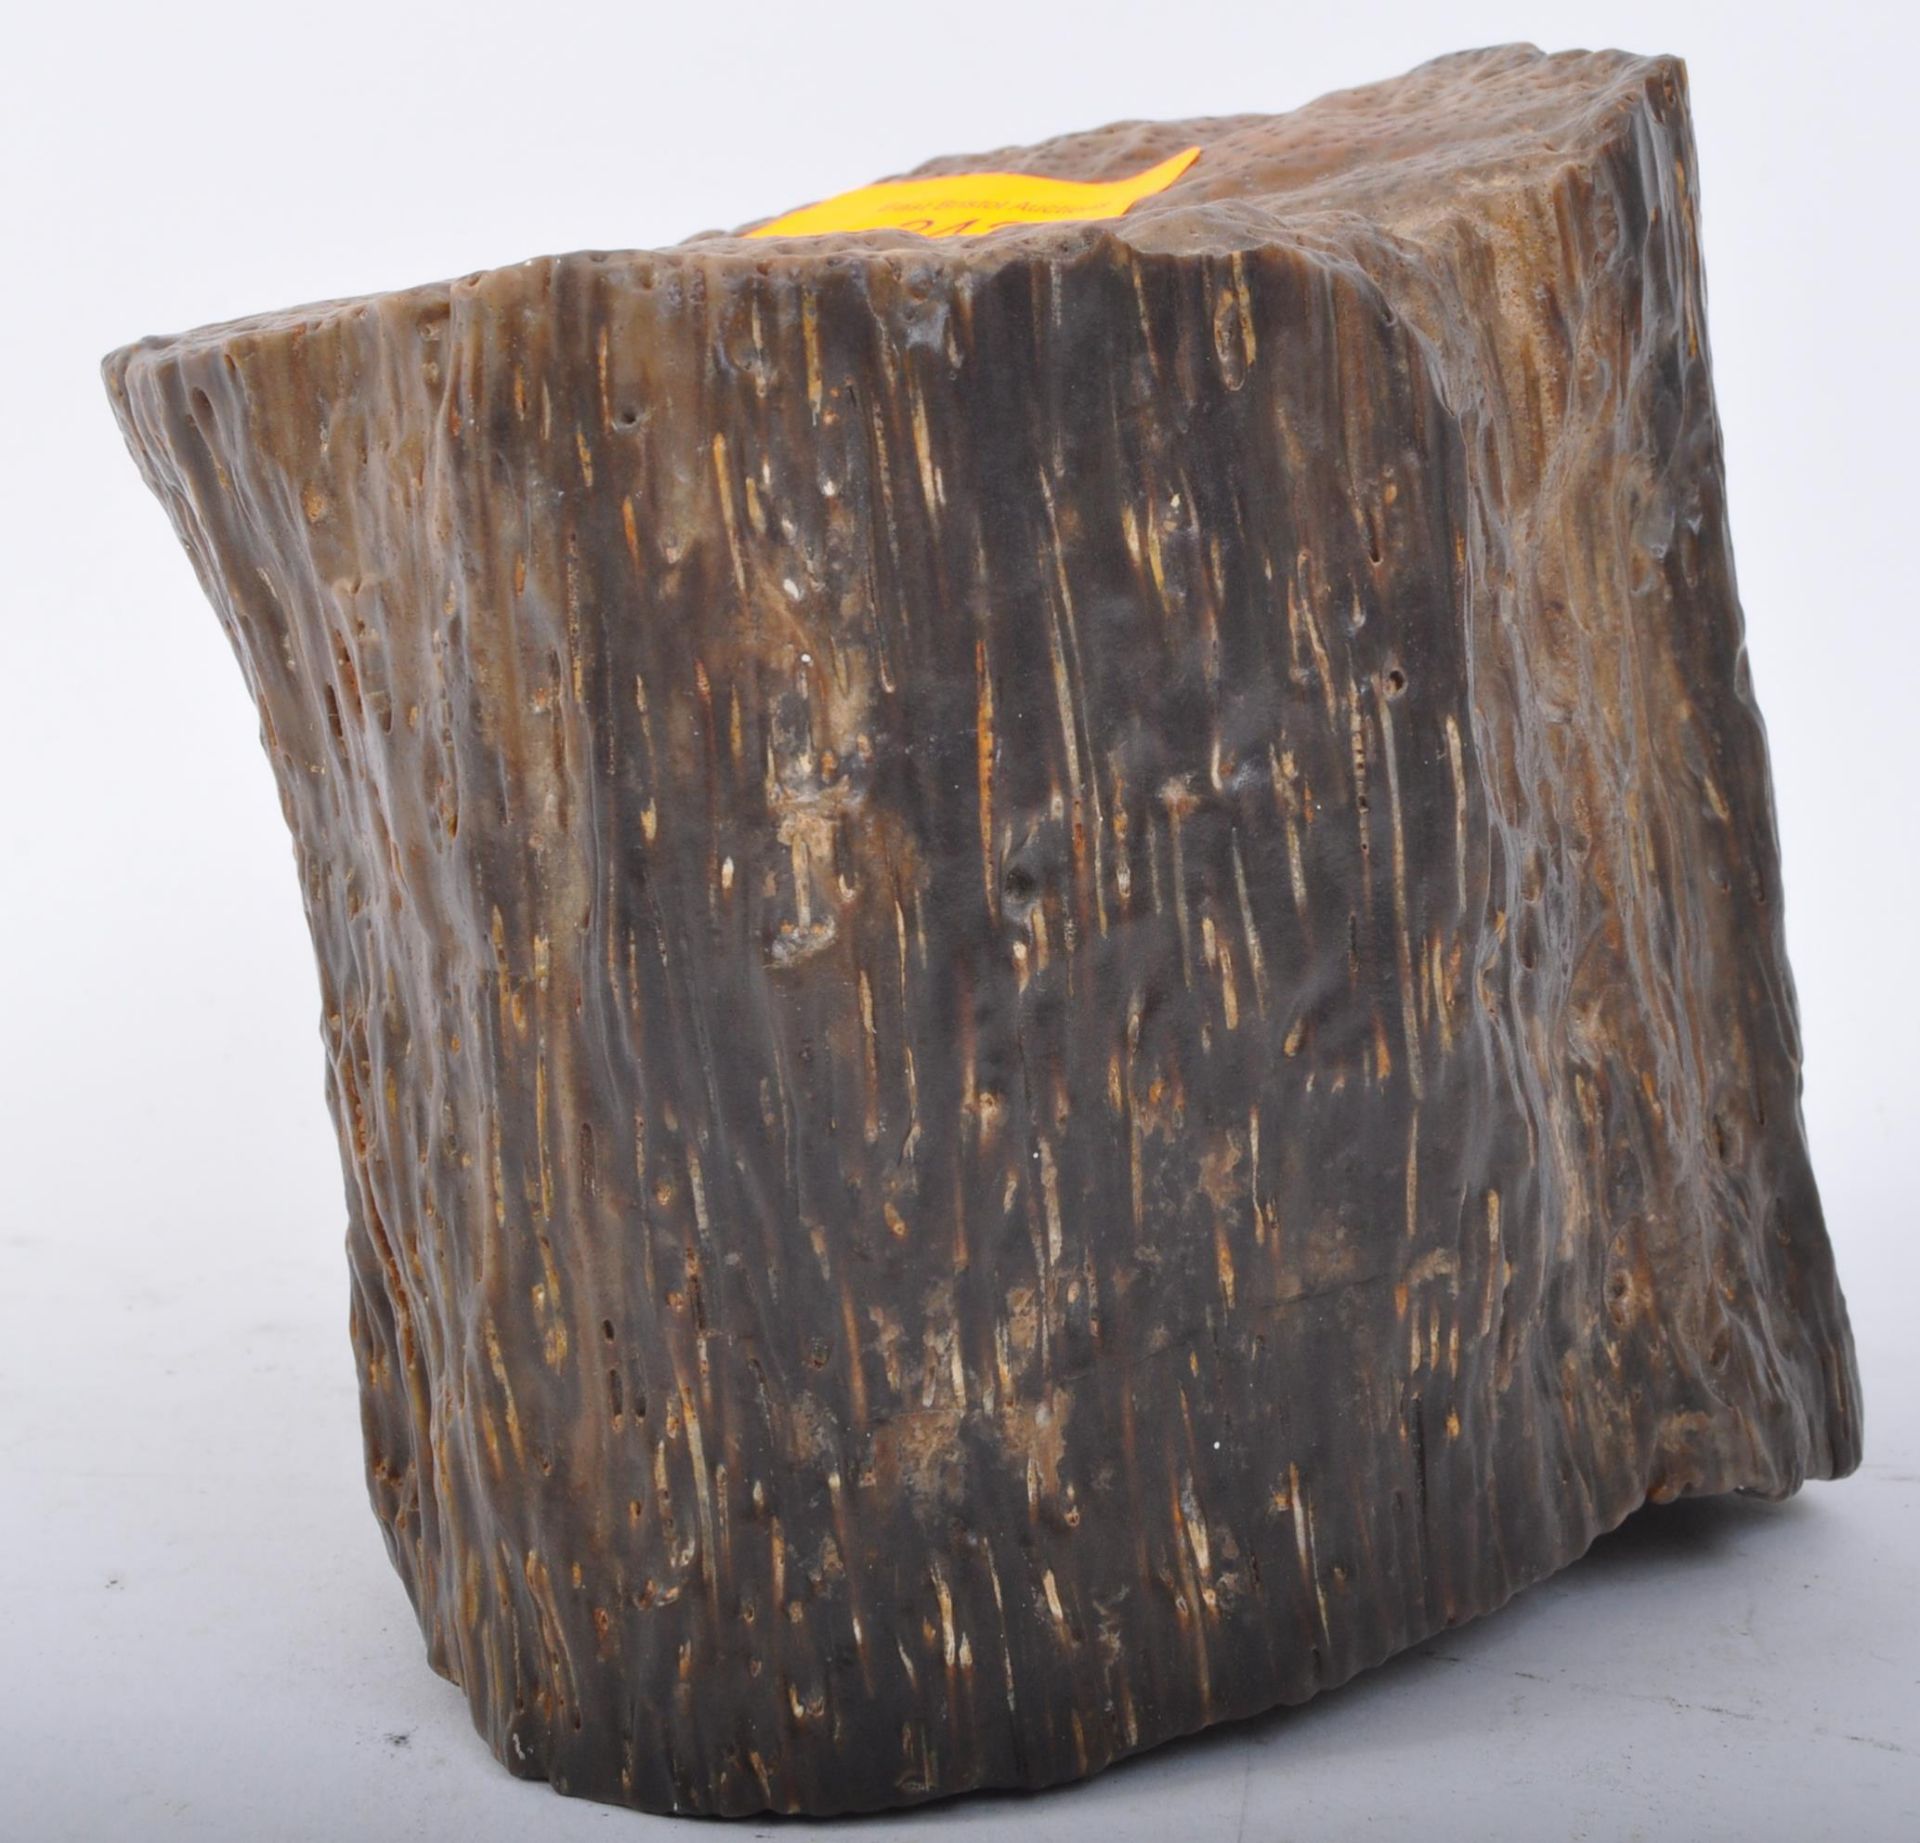 PIECE OF PETRIFIED FOSSILIZED WOOD - Image 3 of 5